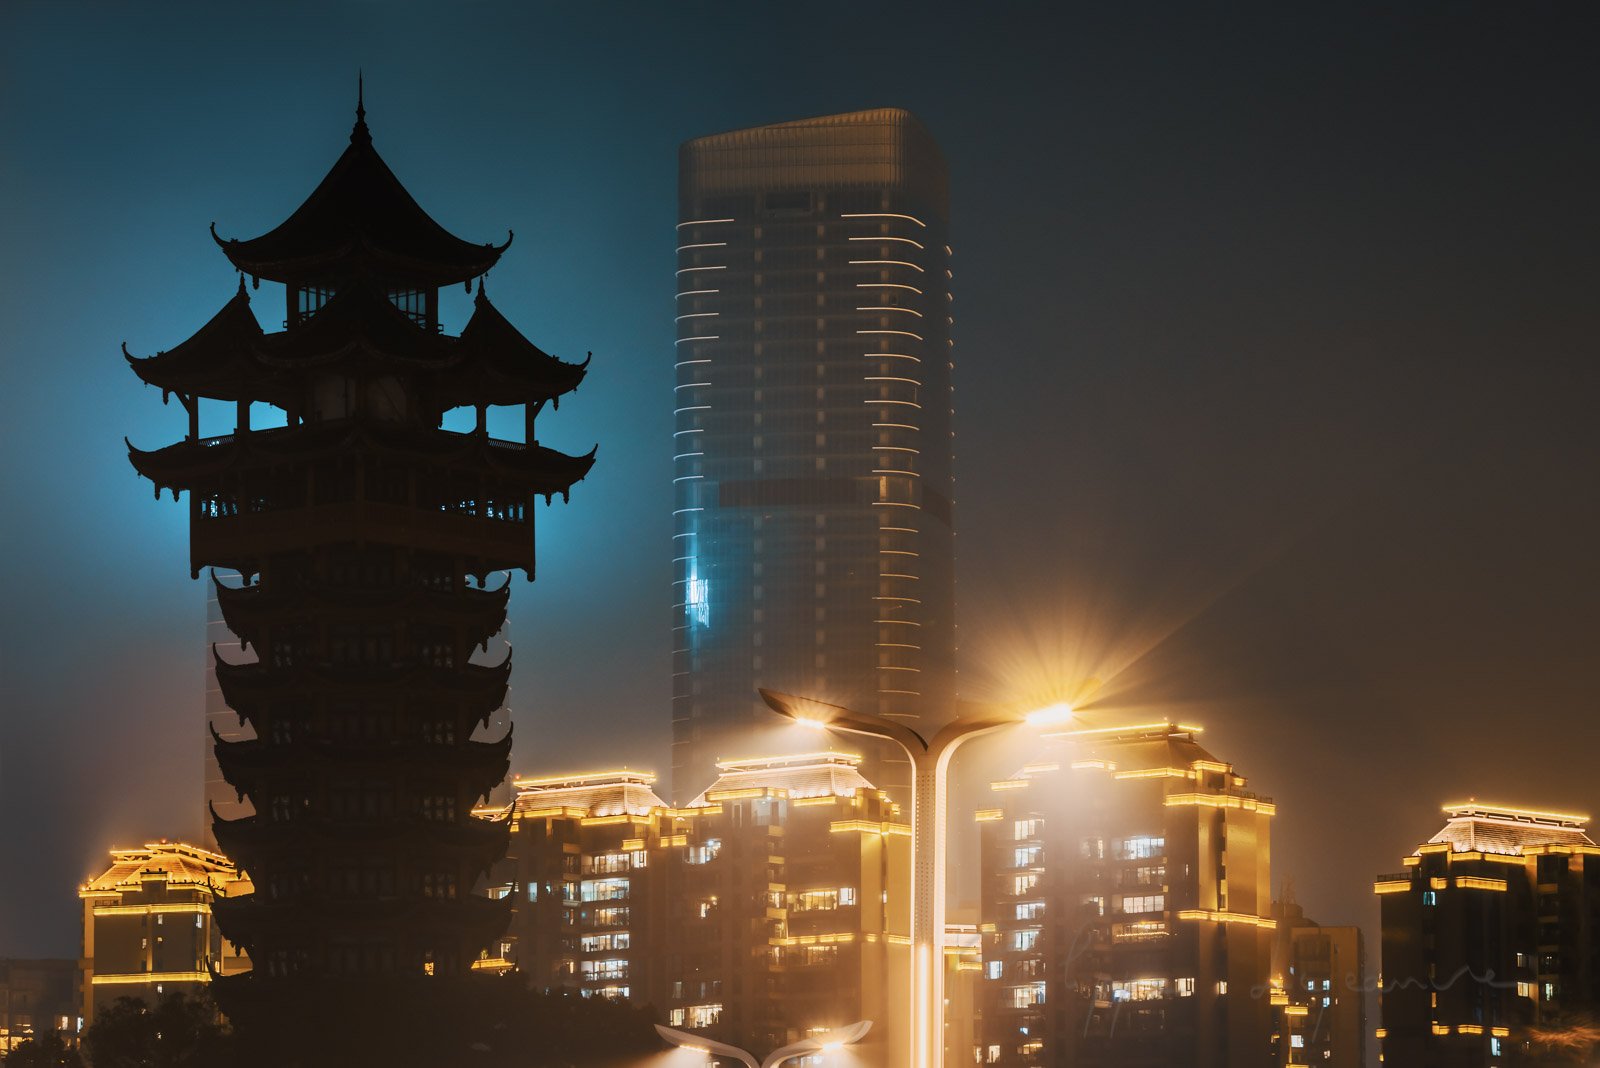 Jiutian tower silhouette in the fog at night against illuminated buldings and skyscrapers in Chengdu, Sichuan province, China